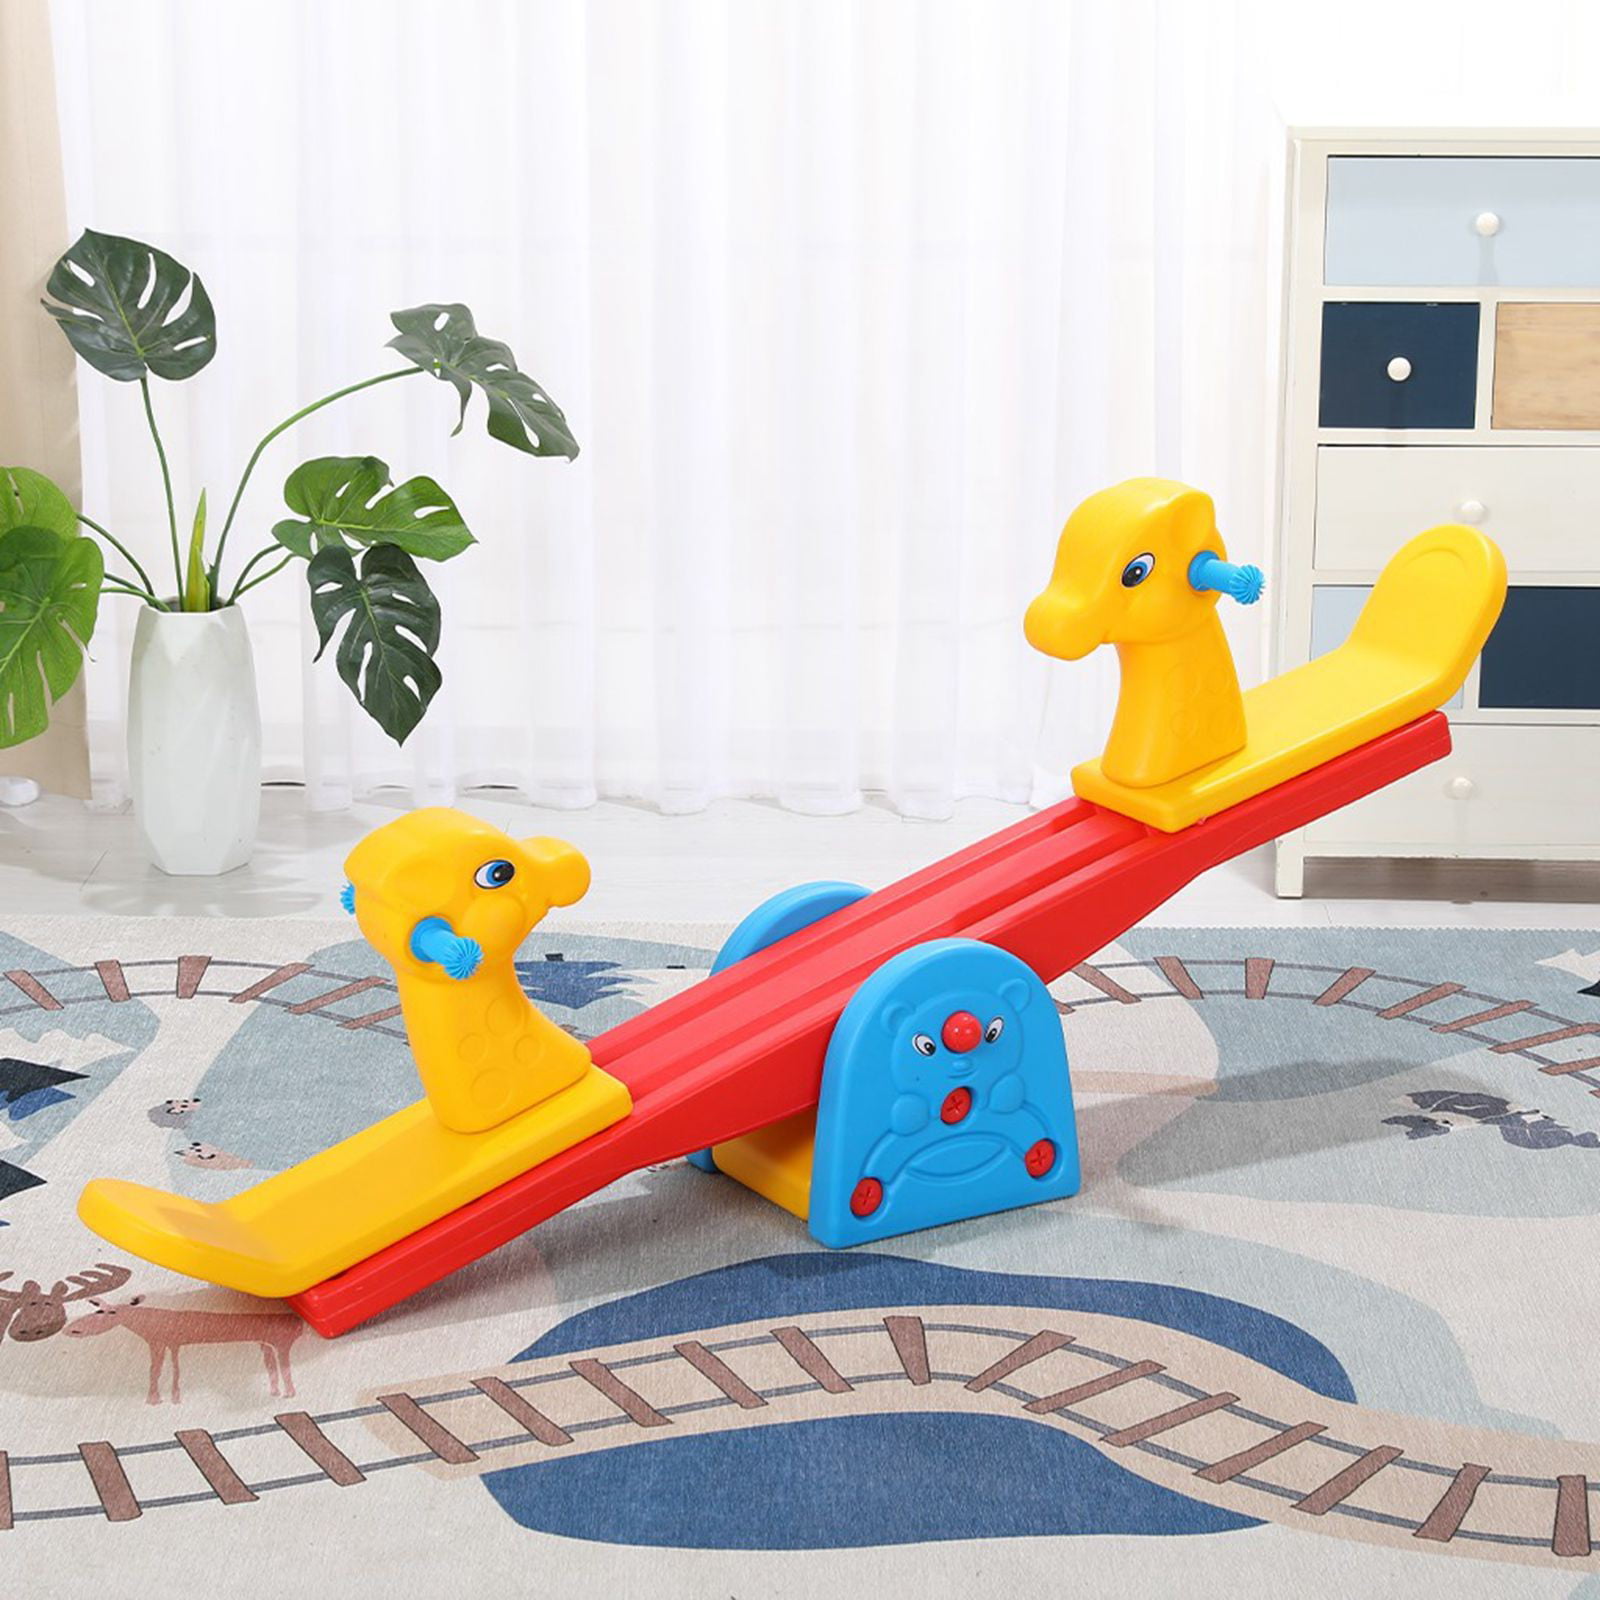 Kids Gift Teeter Totter Backyard or Playroom Equipment with Easy-Grip Handles Durable Indoor or Outdoor Play Develop Children Sense of Balance and Coordination Seesaw for Kids